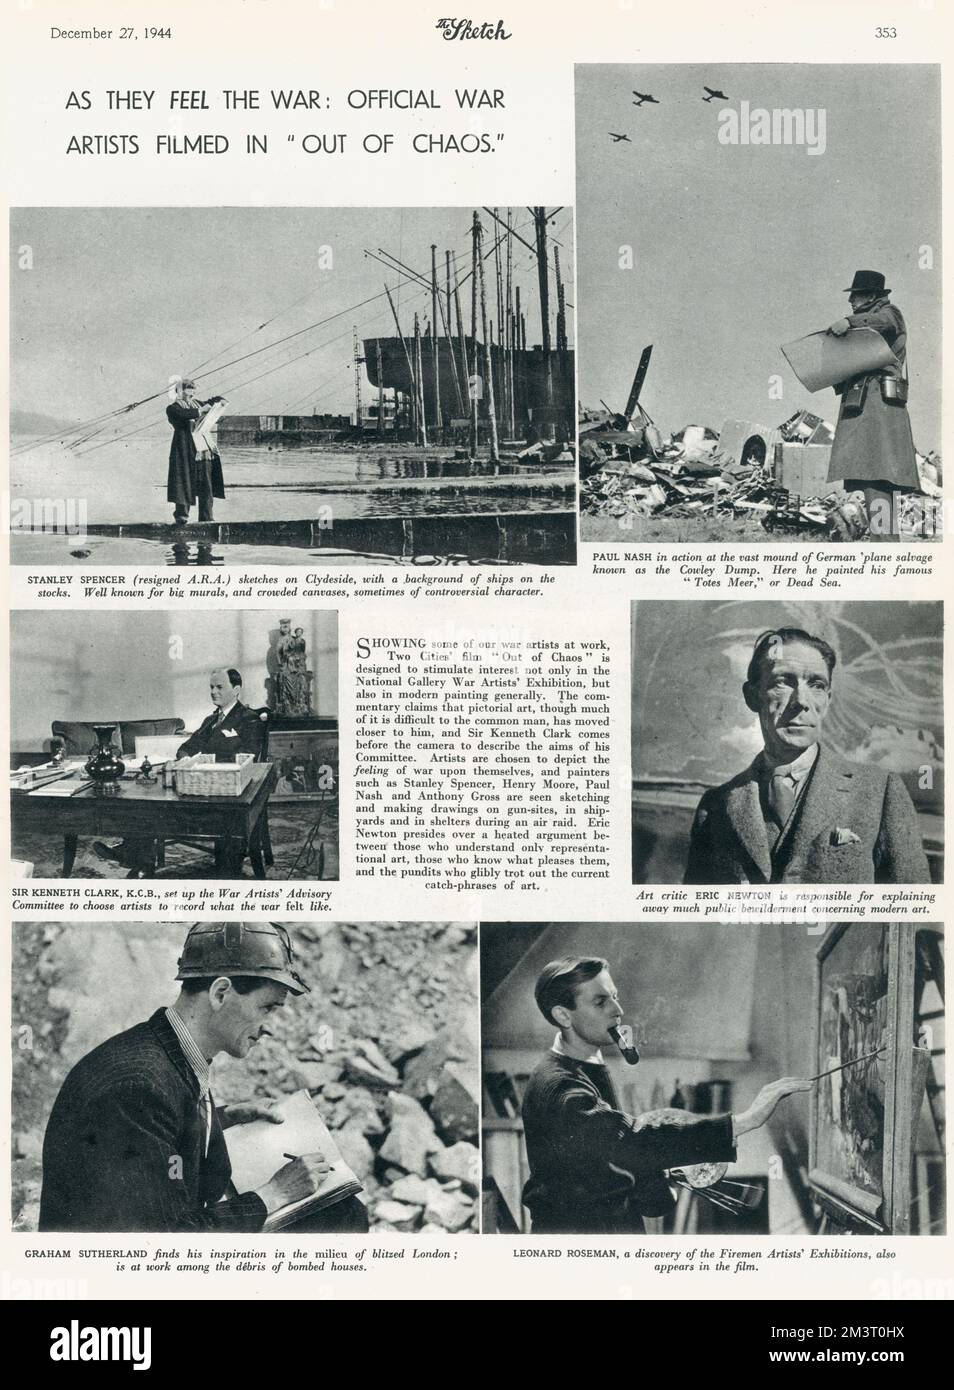 Six war artists at work, filmed for the Two Cities' film &quot;Out of Chaos&quot; - aimed at generating interest in the National Gallery War Artists' Exhibition, but also in modern painting generally. (from top left - clockwise): Stanley Spencer sketches on Clydeside, Paul Nash at the vast mound of German plane salvage known as Cowley Dump, Art Critic Eric Newton, Leonard Roseman, Graham Sutherland working among the debris of bombed London buildings and Sir Kenneth Clark who set up the War Artists' Advisory Committee.     Date: 1944 Stock Photo